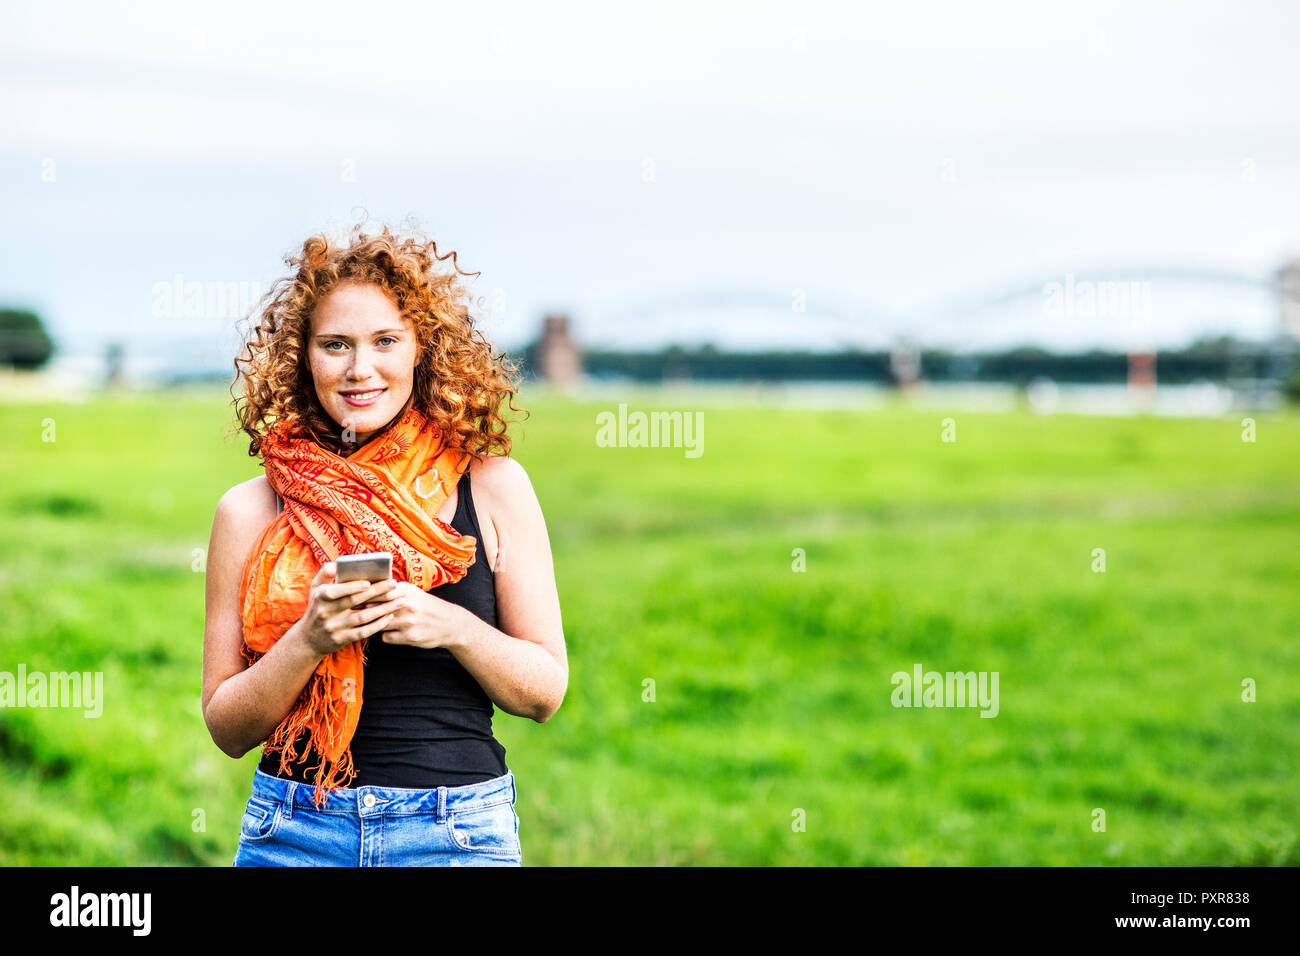 Portrait of smiling young woman with curly red hair on a meadow Stock Photo